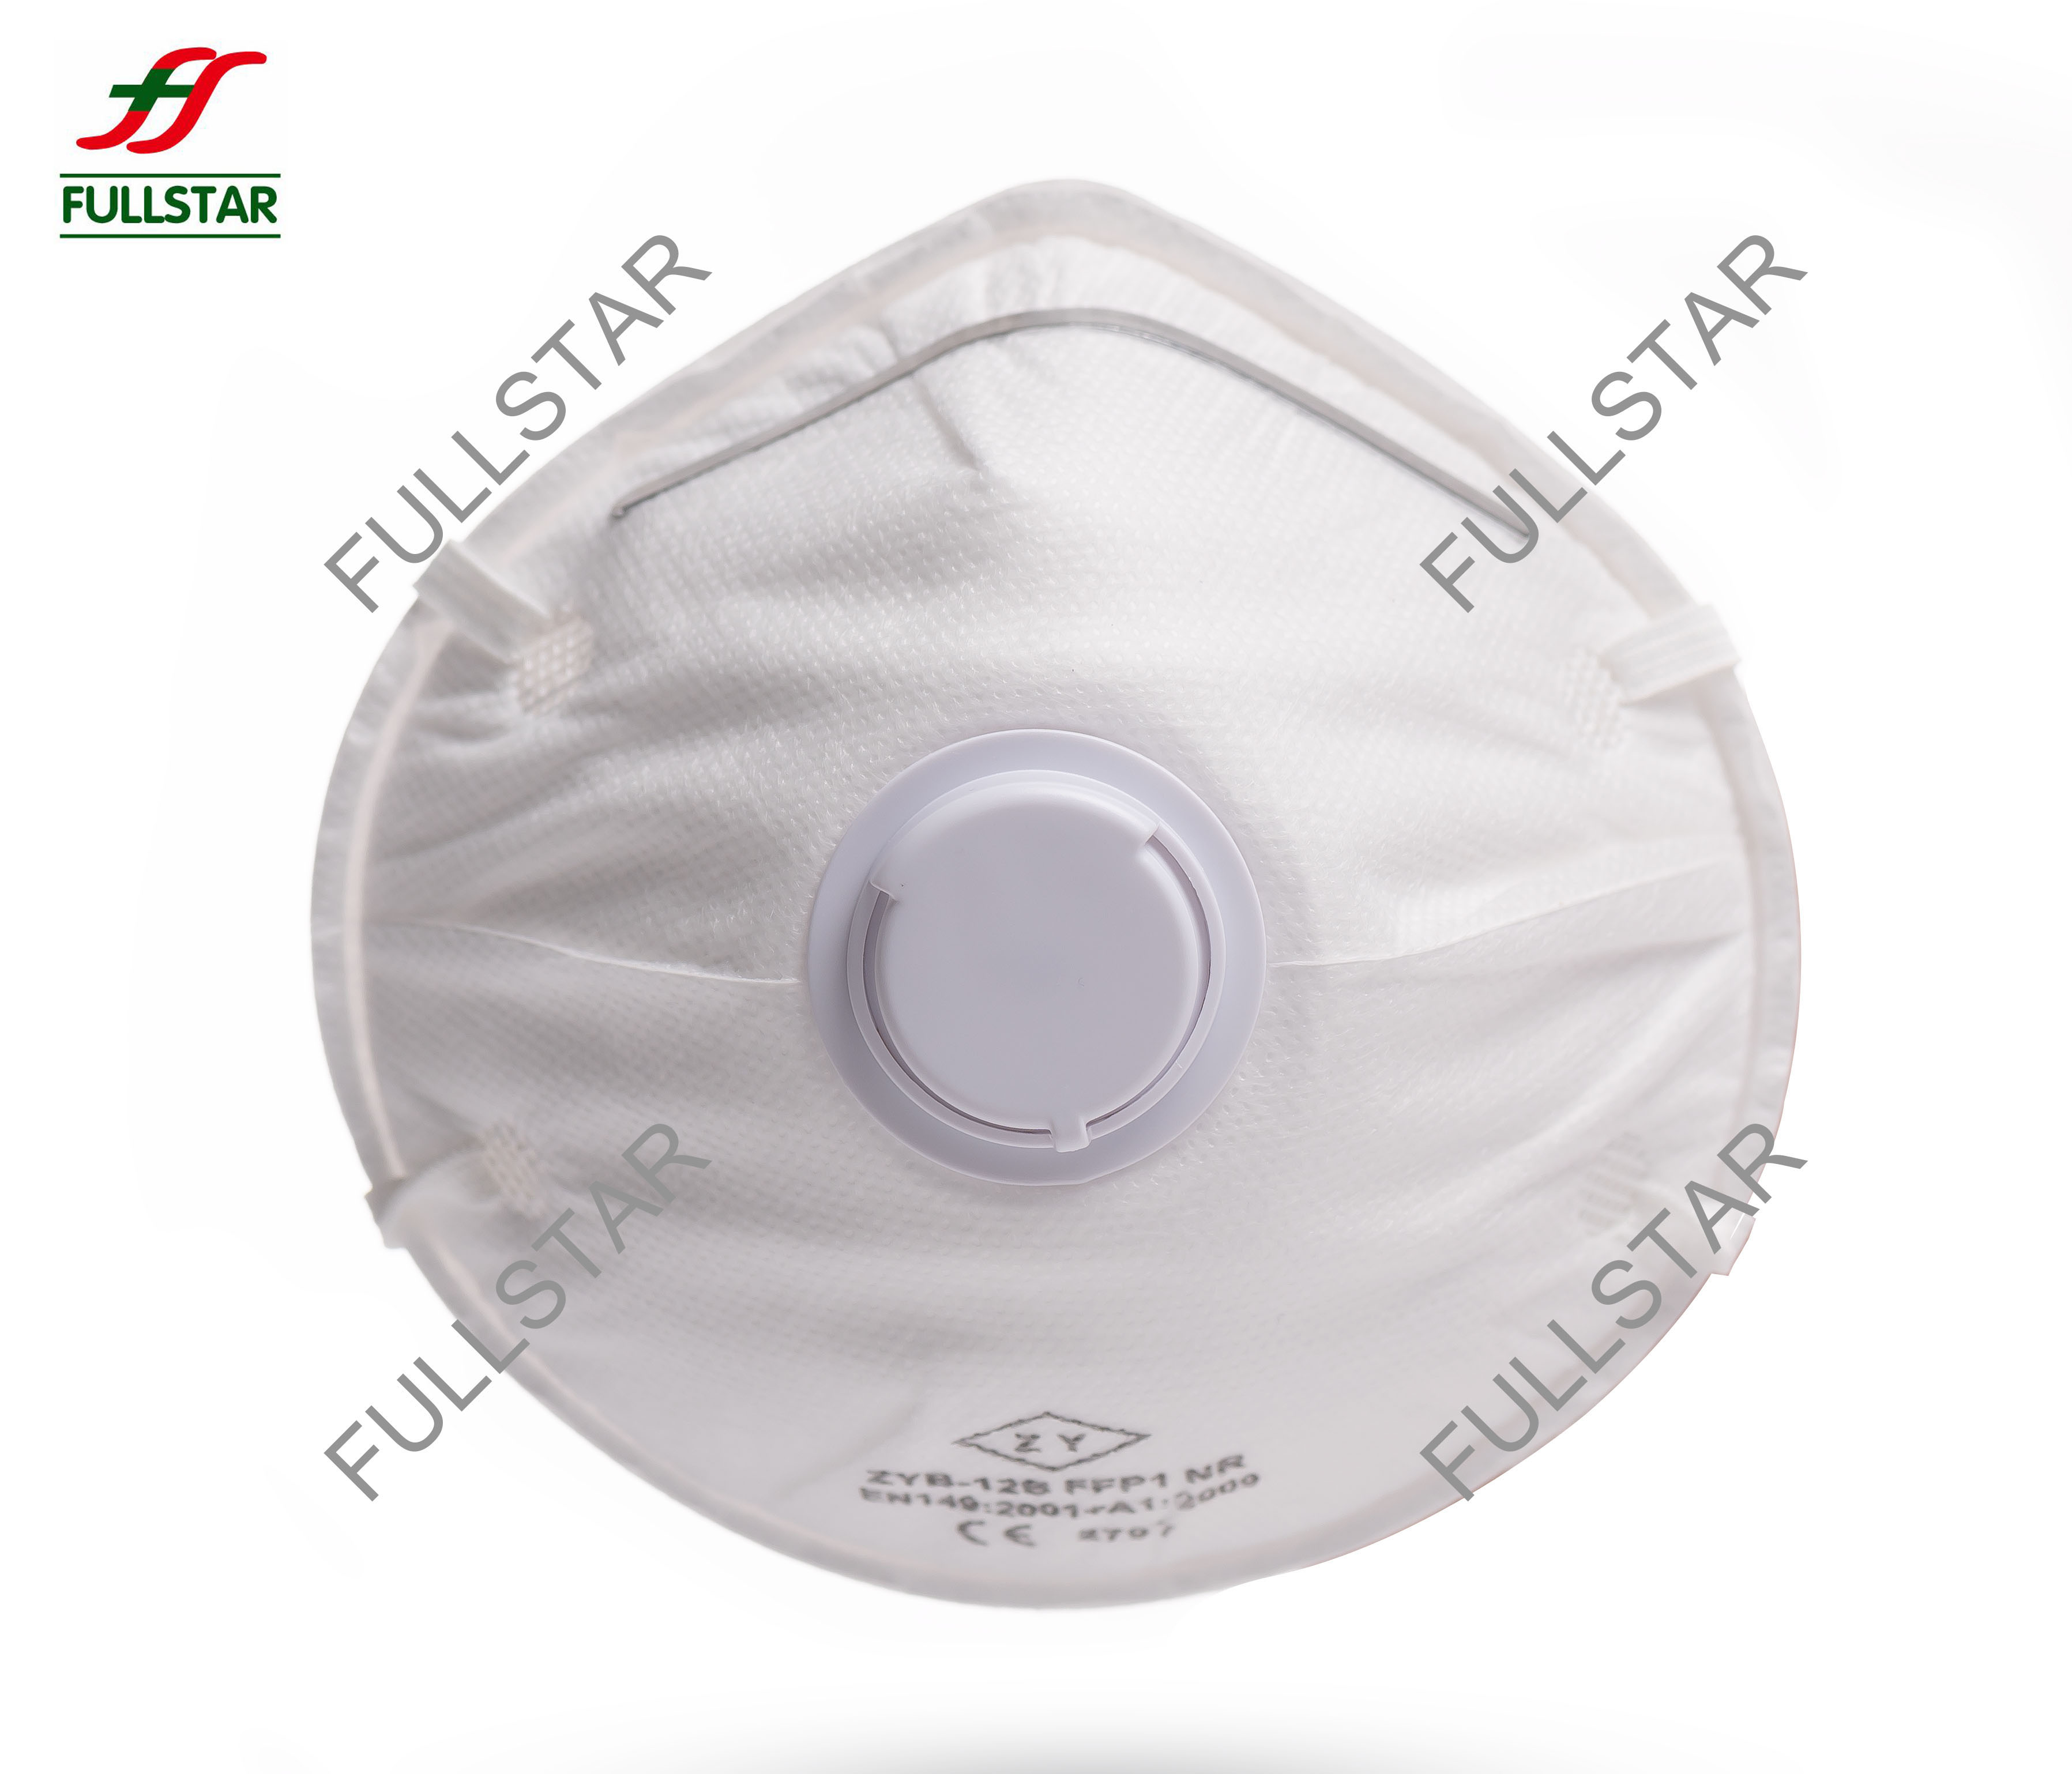 FFP1 Cone Style Face Mask with valve